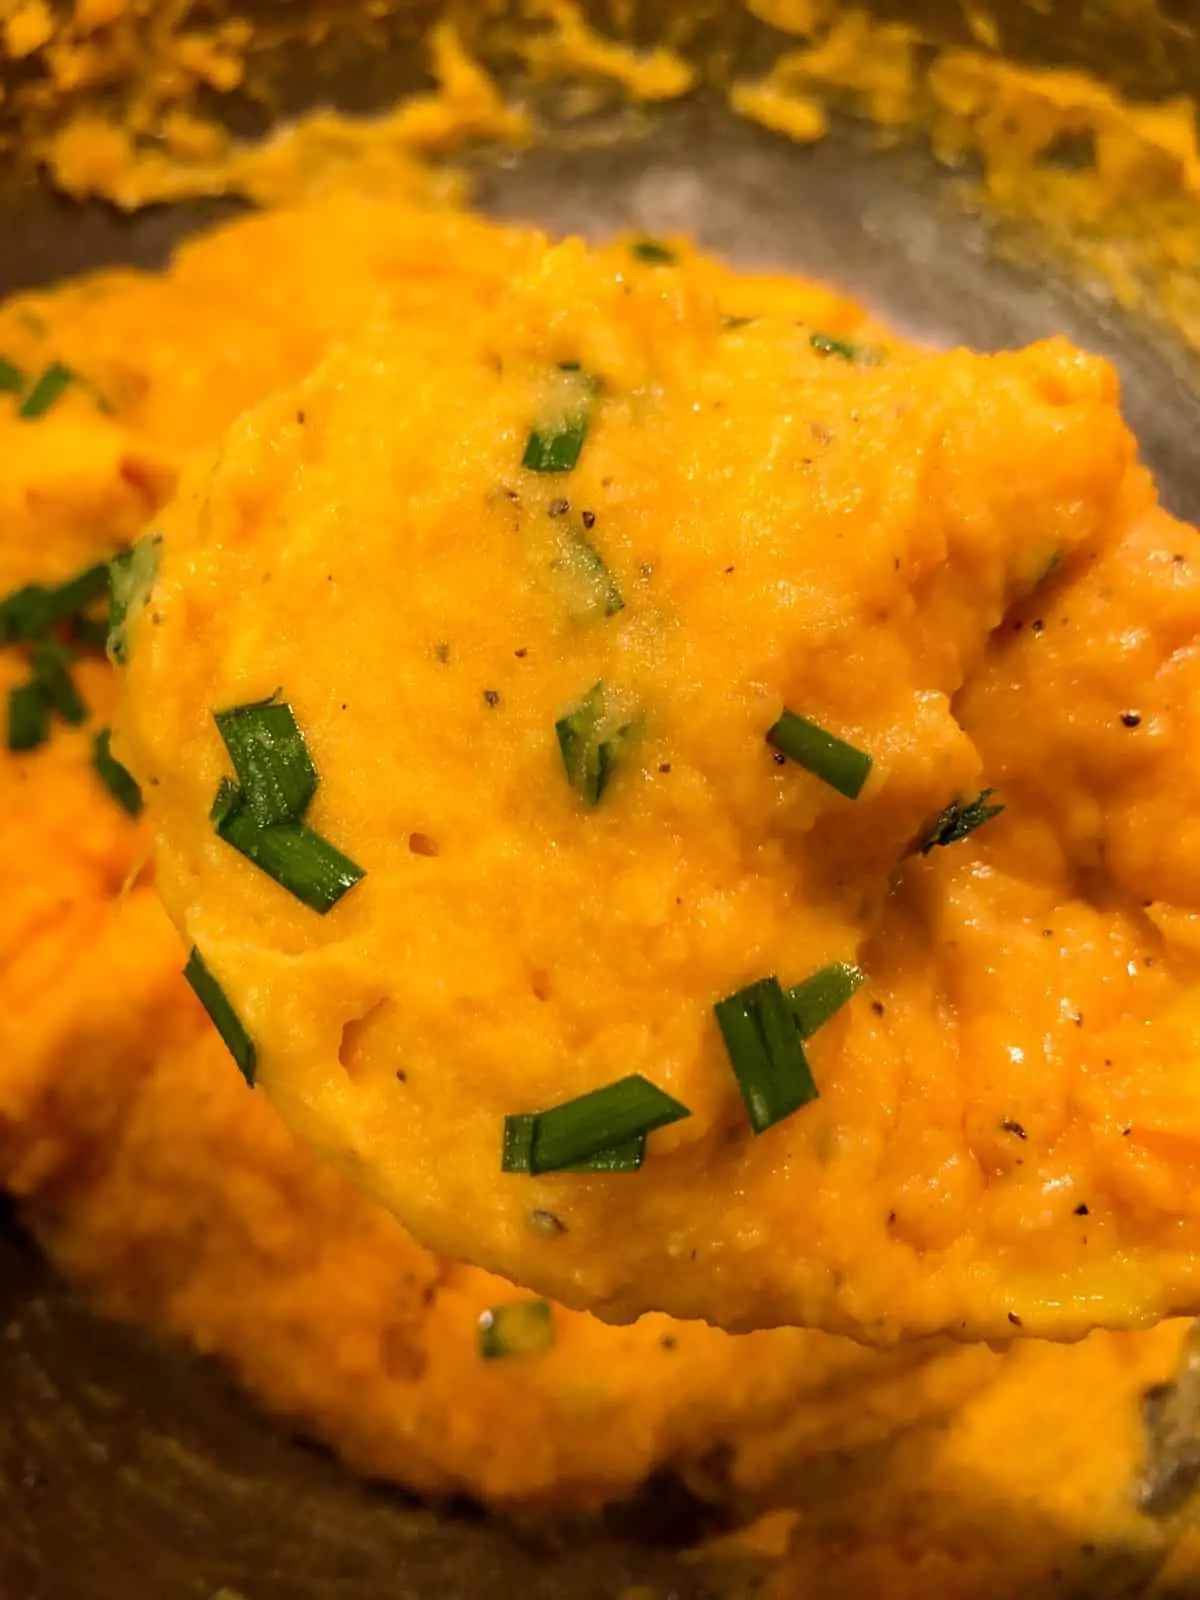 Creamy mashed sweet potatoes with chives.